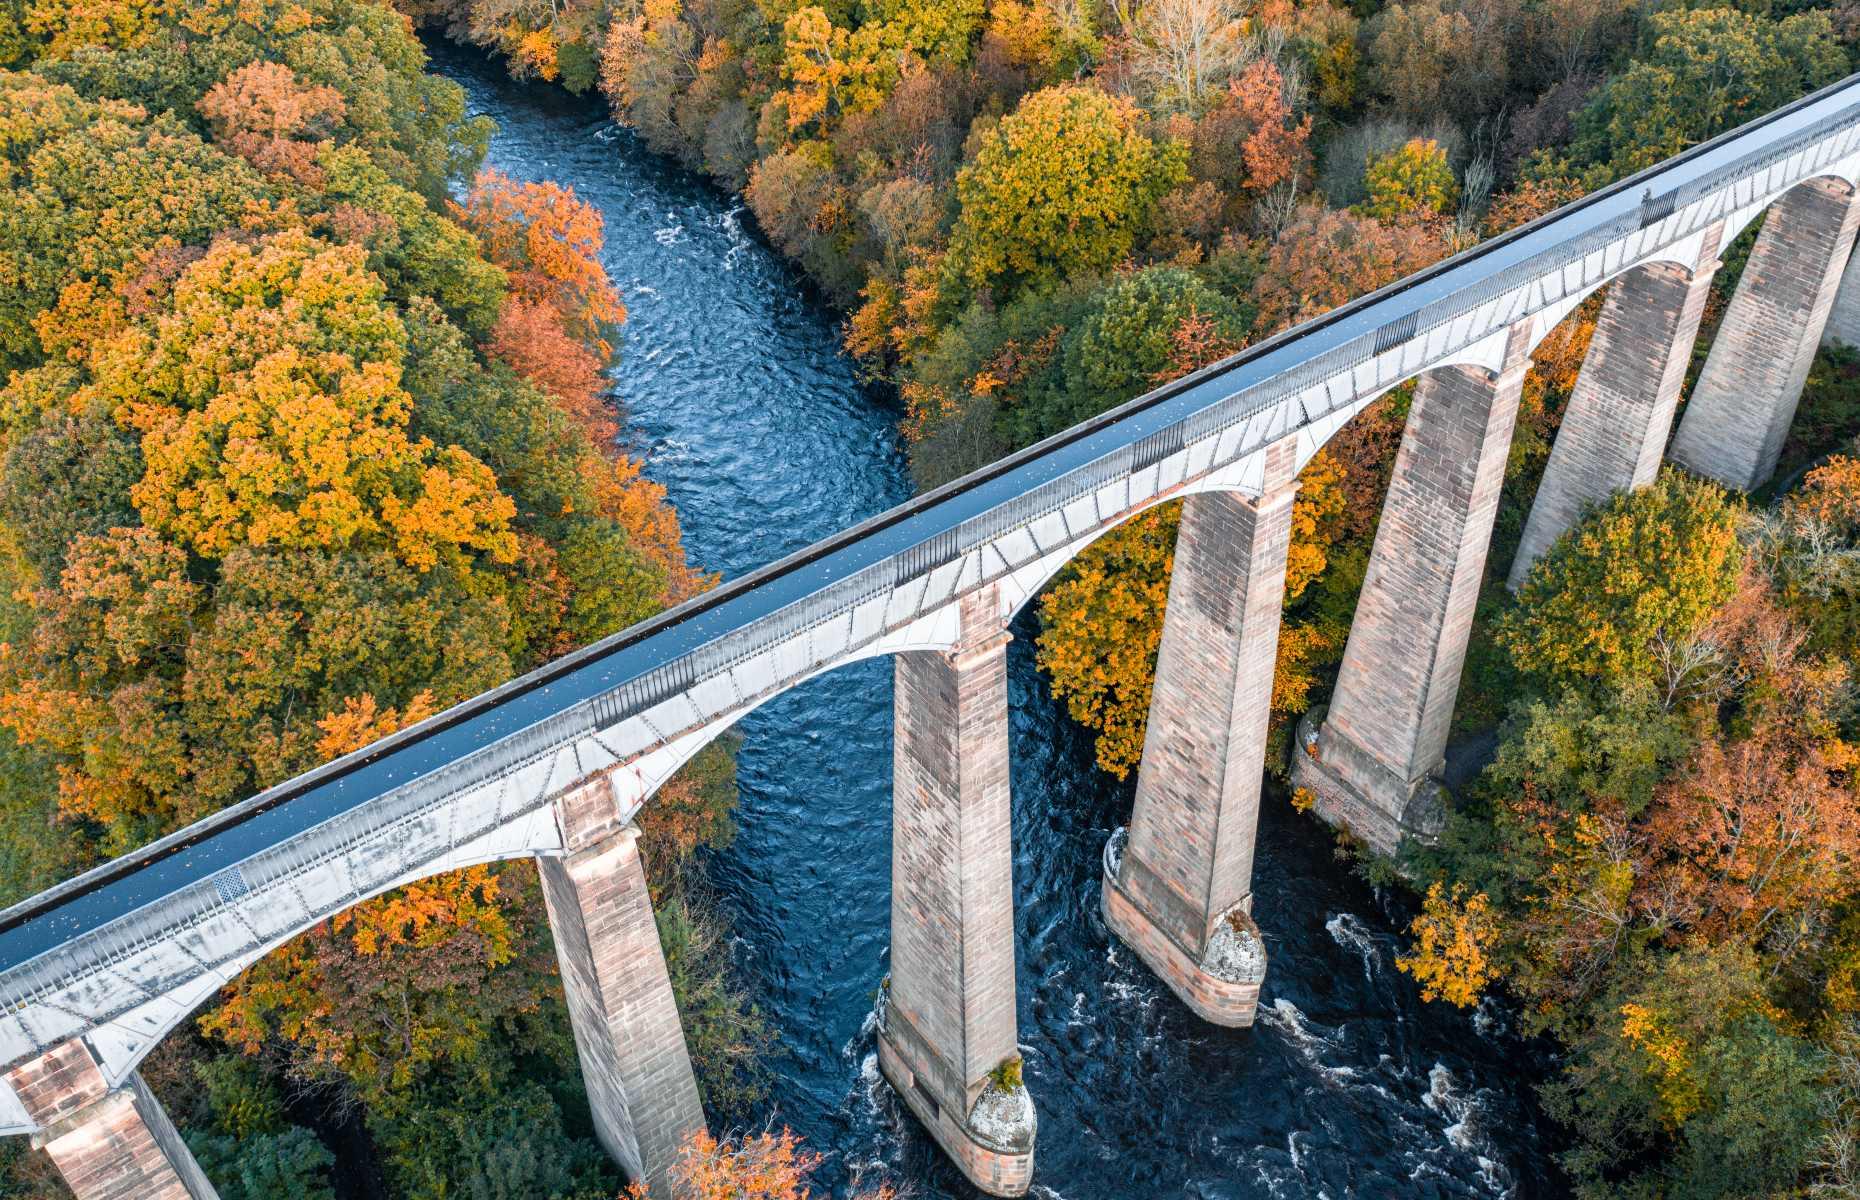 <p>Soaring high above the Vale of Llangollen, the <a href="https://www.pontcysyllte-aqueduct.co.uk/">Pontcysyllte Aqueduct</a>, meaning 'the bridge that connects', trails across the River Dee in northeast Wales. The bridge was designed by Thomas Telford and William Jessop in 1805. Nicknamed 'the stream in the sky', the historic bridge and 11 miles of canal are now a UNESCO-listed site and are considered a triumph of civil engineering.</p>